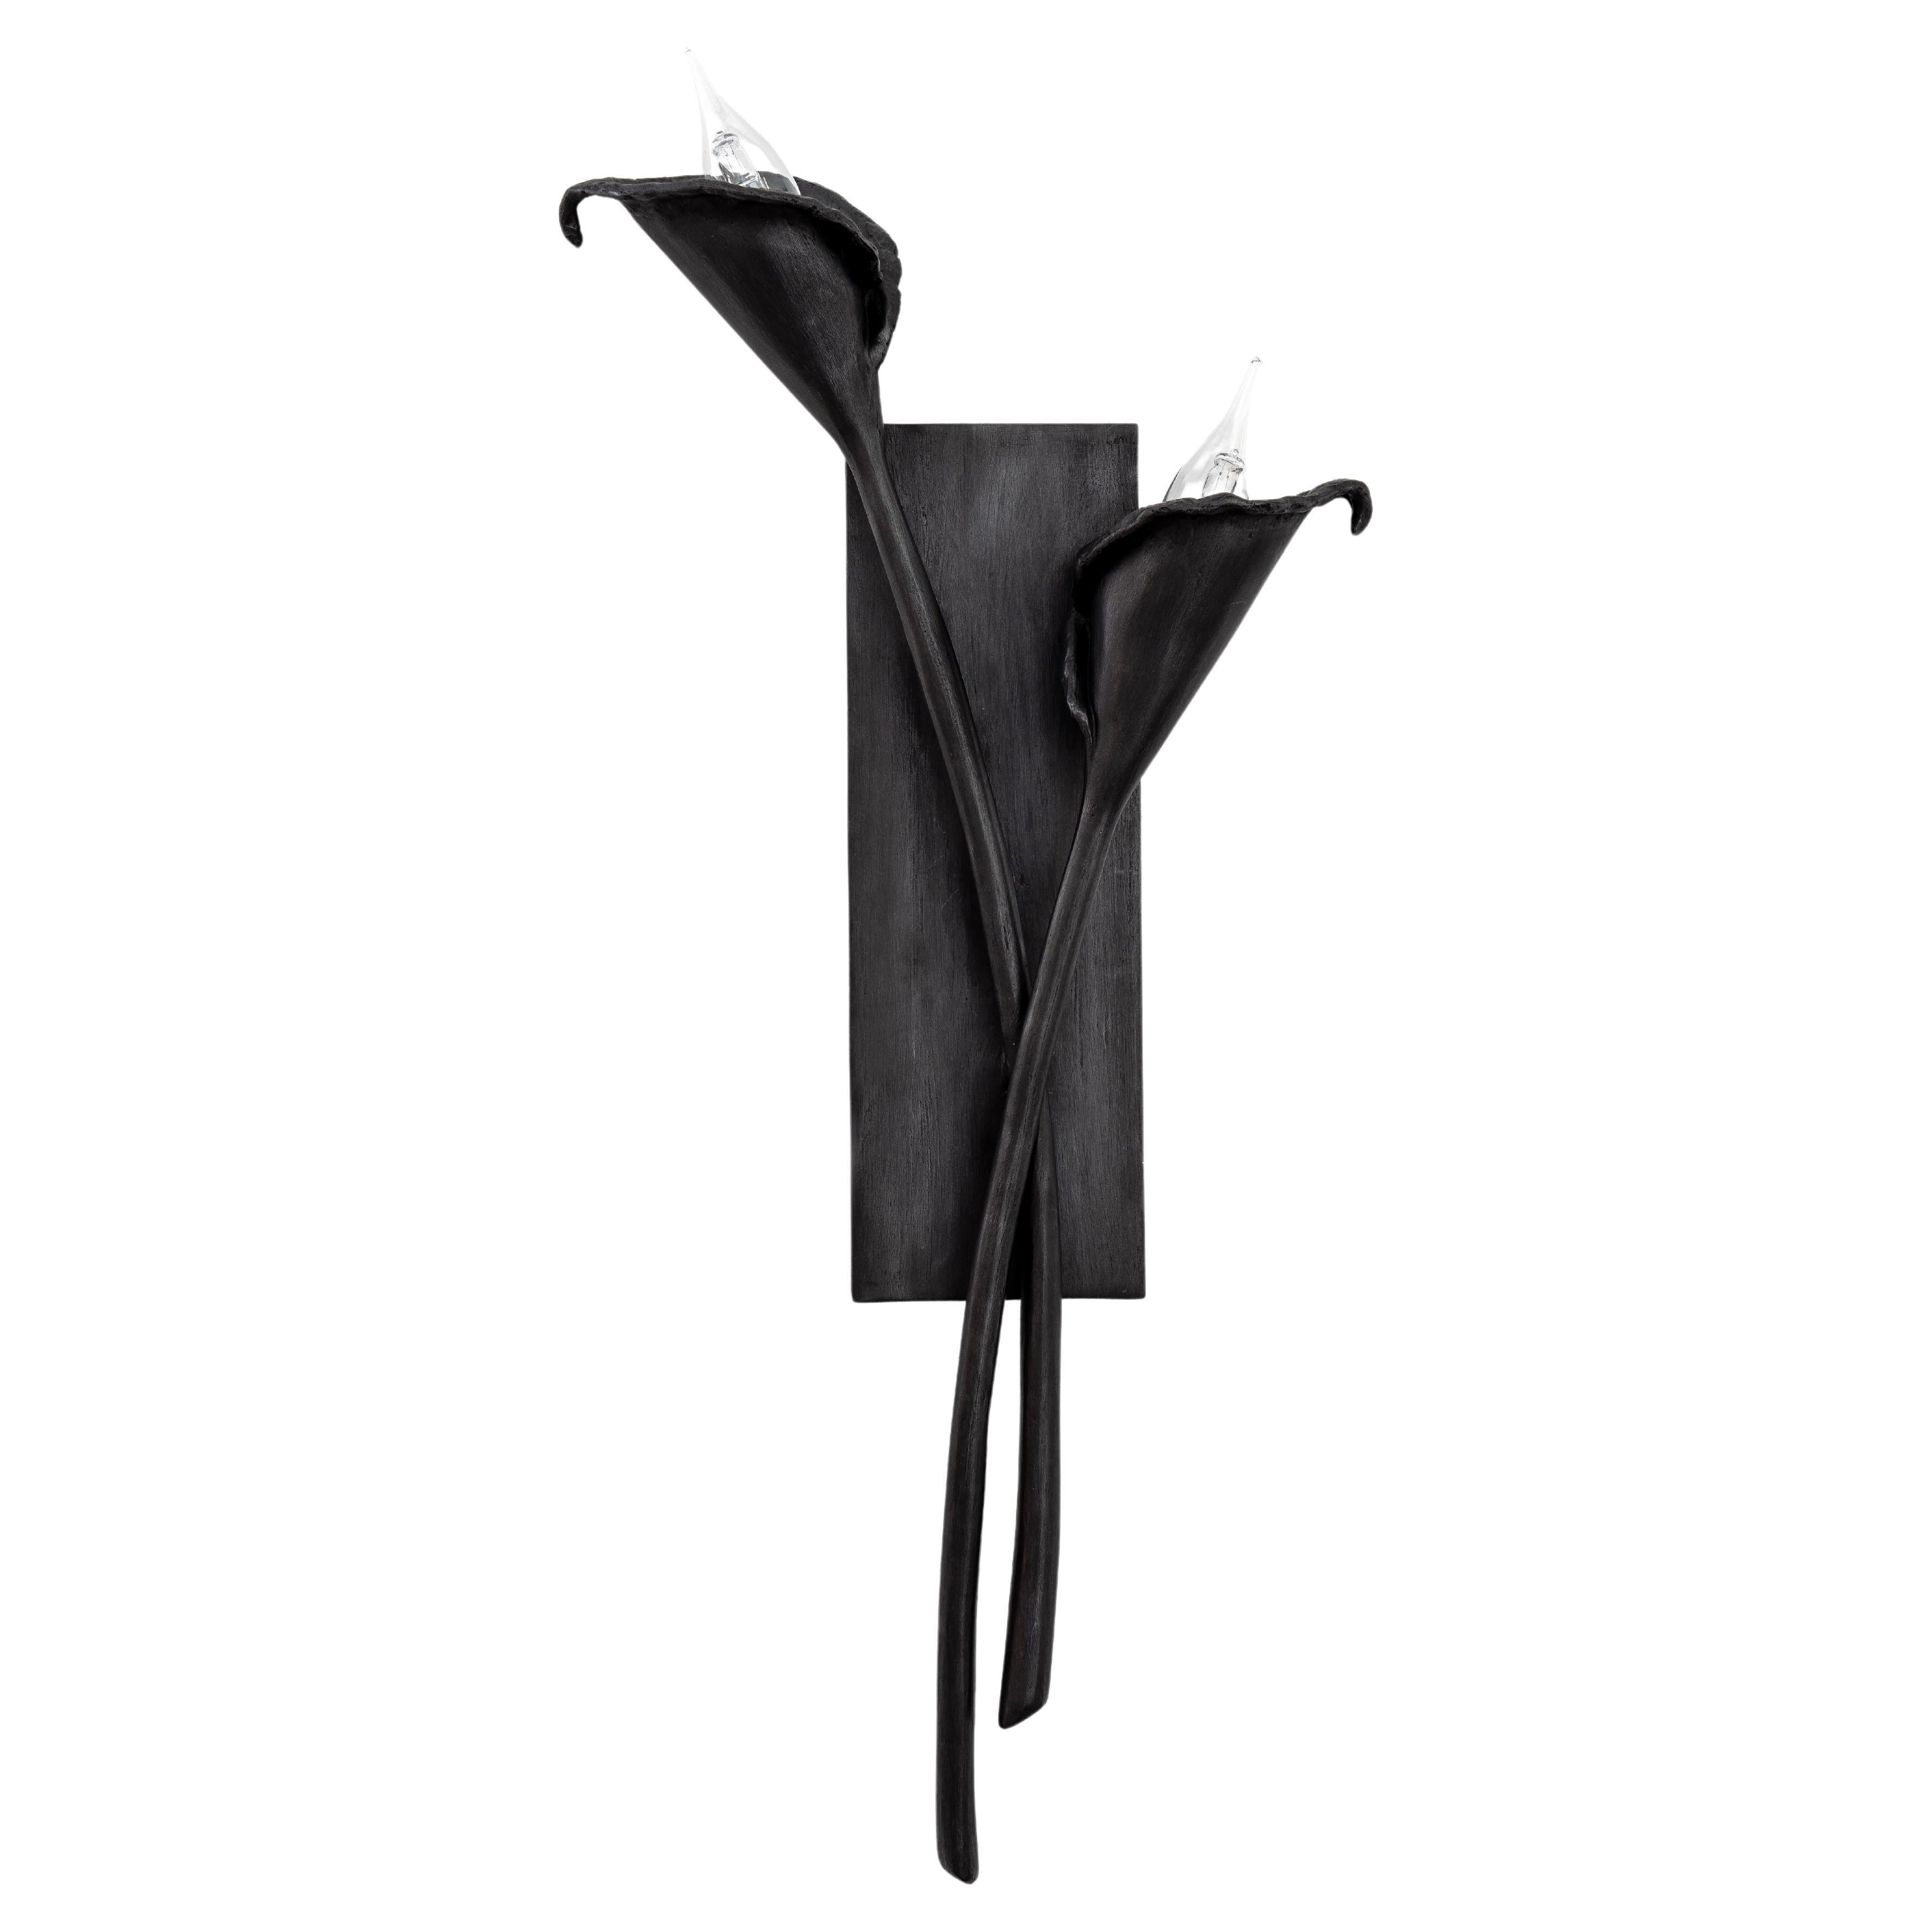 Calla Lily Contemporary Wall Sconce, Wall Light in Black Plaster, Pair, Benediko For Sale